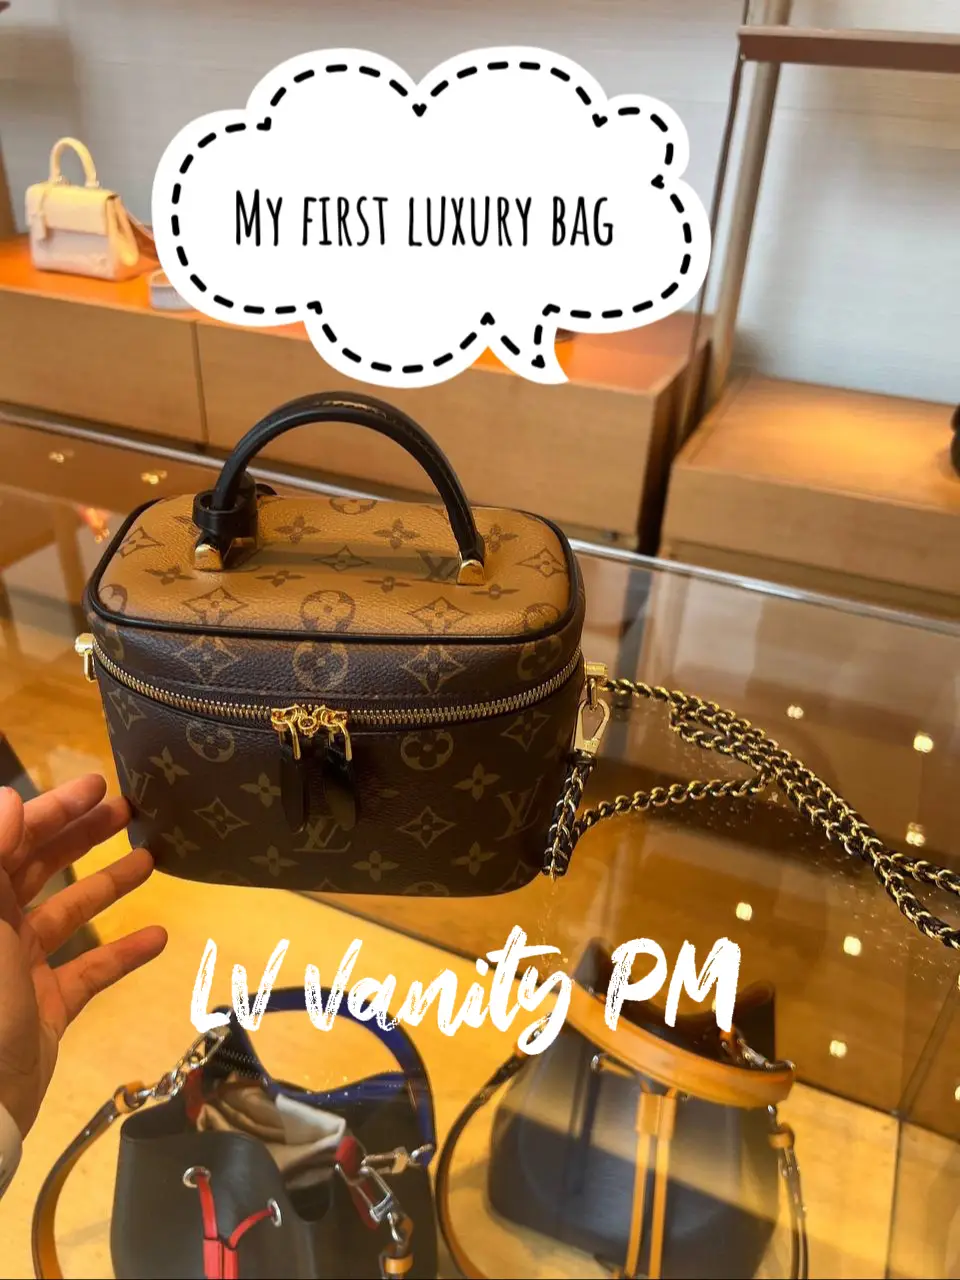 LOUIS VUITTON NEVERFULL PM UNBOXING, REVIEW & FIRST IMPRESSION